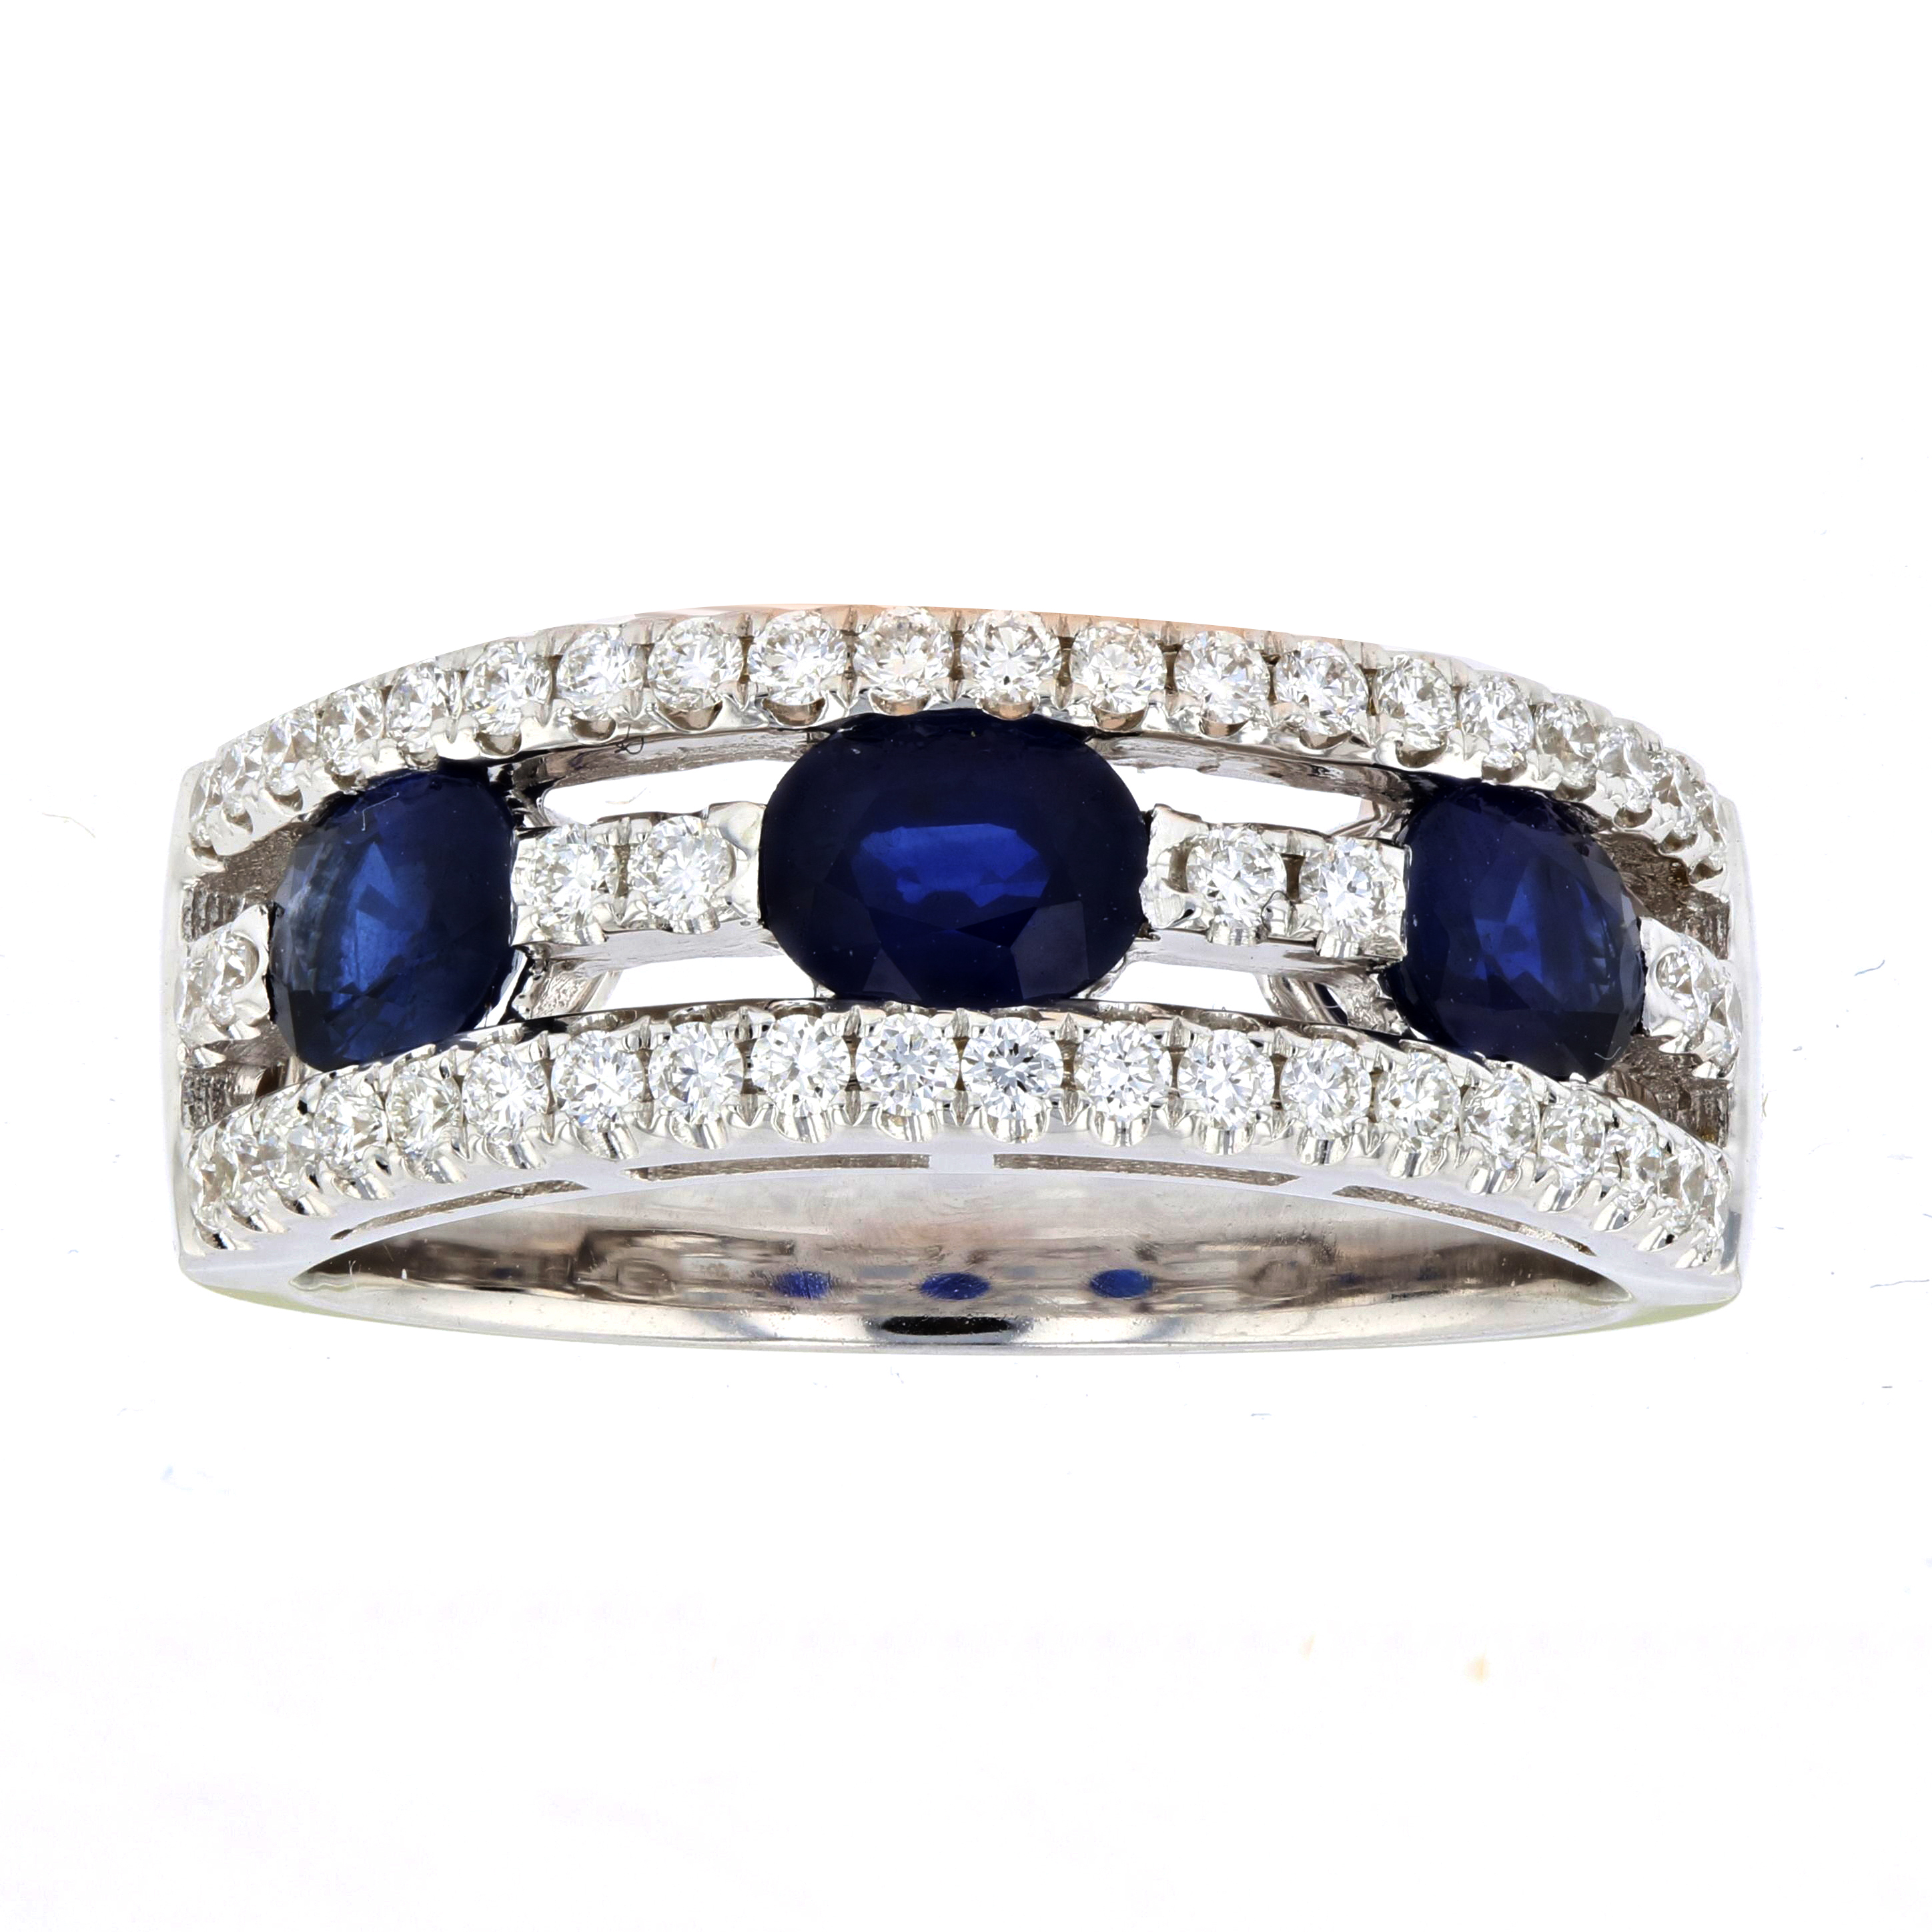 View 1.77ctw Diamond and Sapphire Ring in 18k White Gold